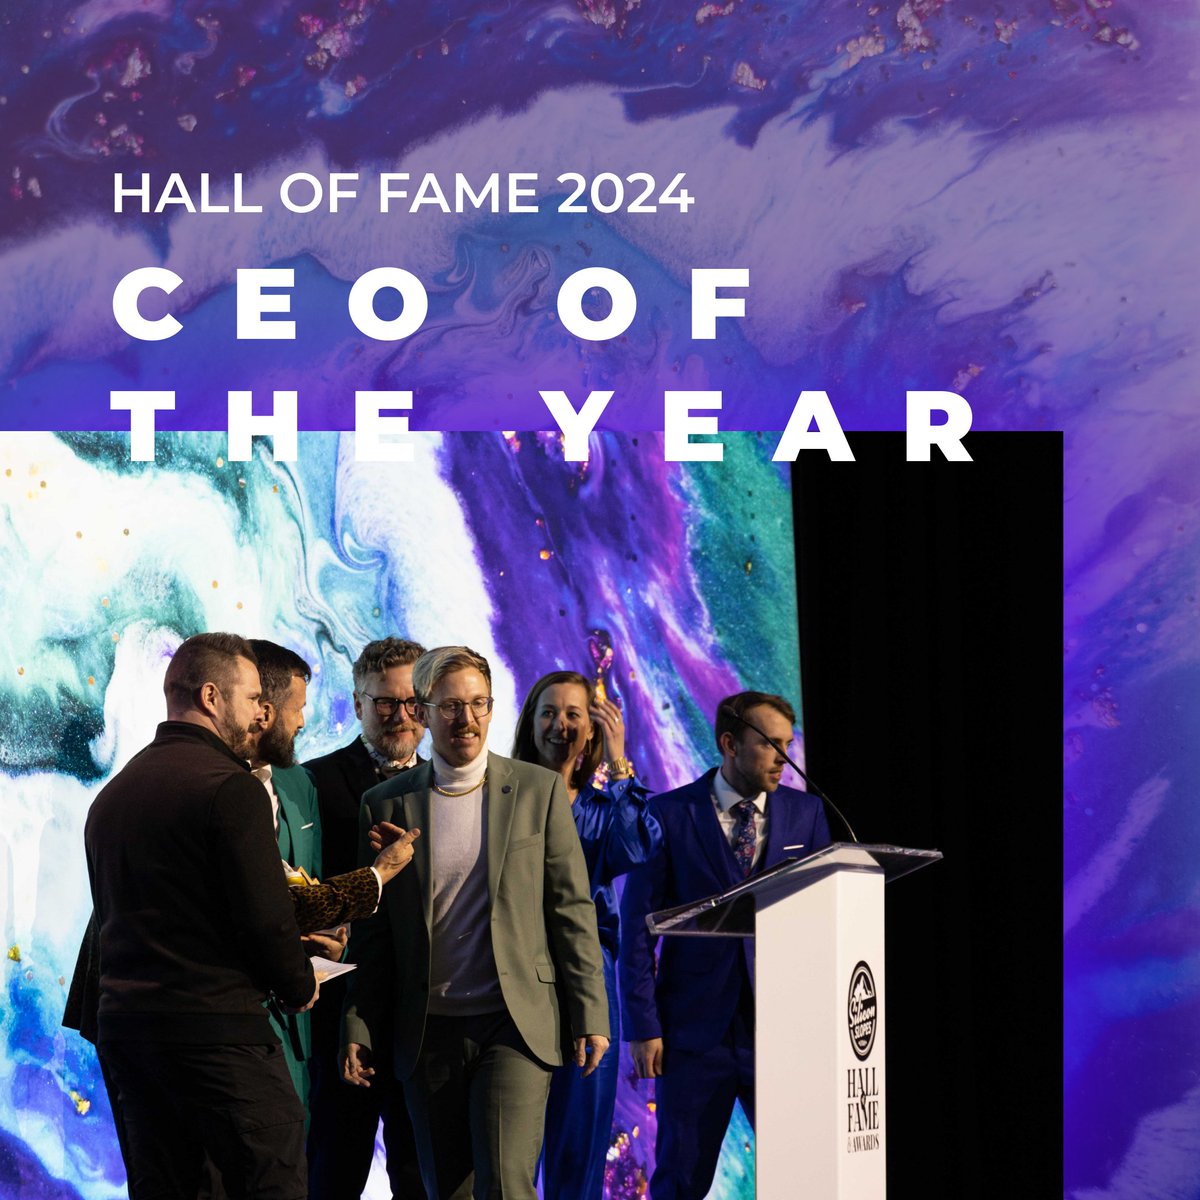 The CEO of the Year knows the way, goes the way, and shows the way to the top with dignity and love to enrich the lives of both customer and employee. The Silicon Slopes Hall of Fame & Awards applications are open now through July 22nd - apply now at halloffame.siliconslopes.com for